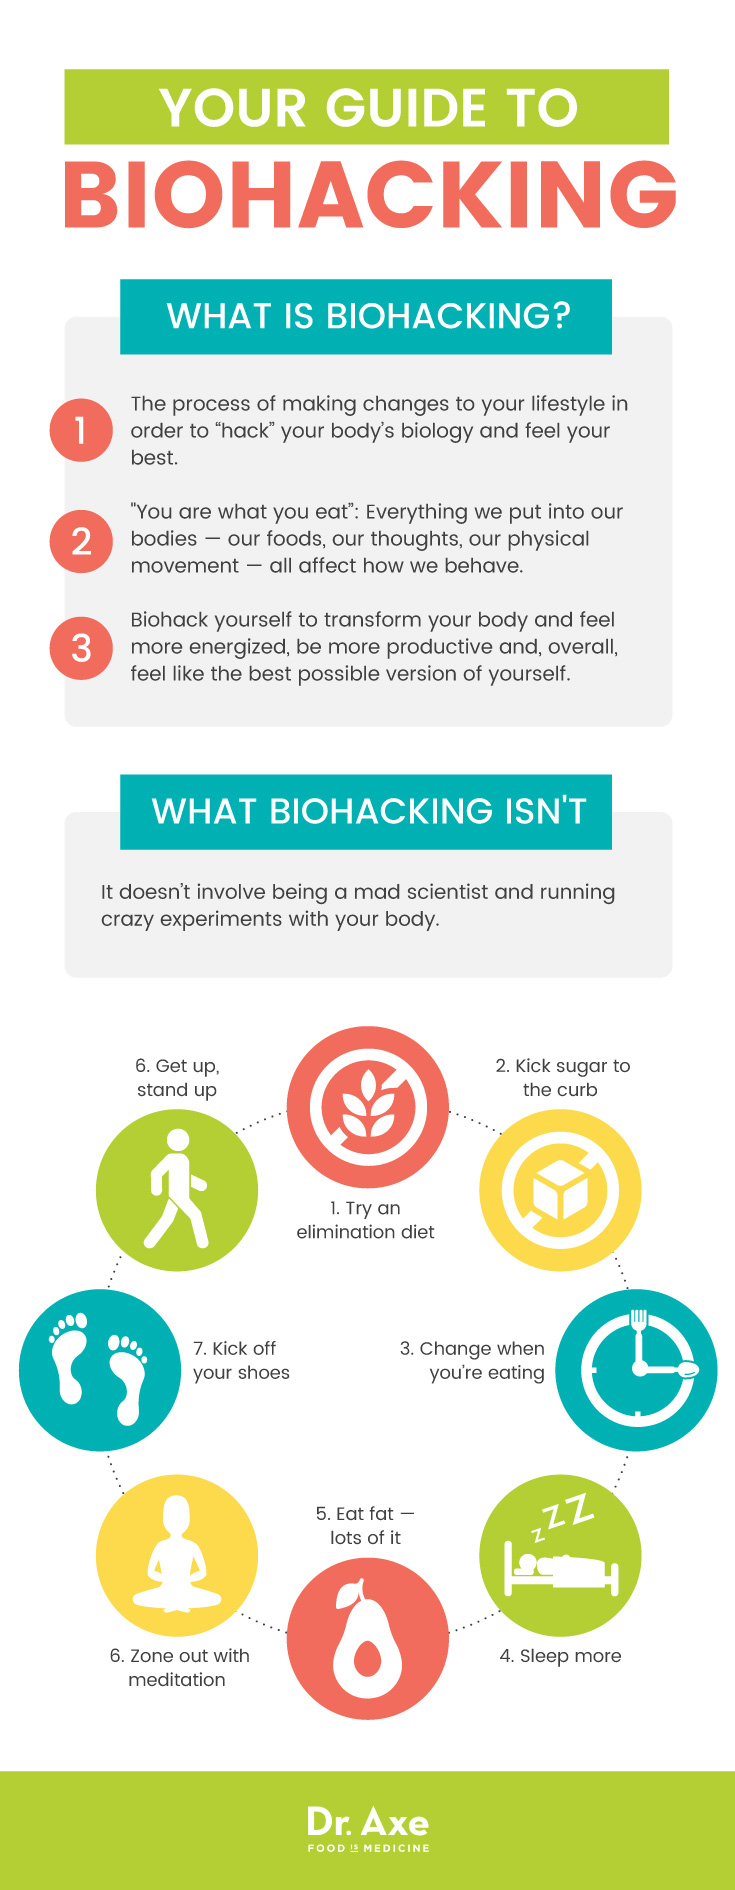 Your guide to biohacking - Dr. Axe